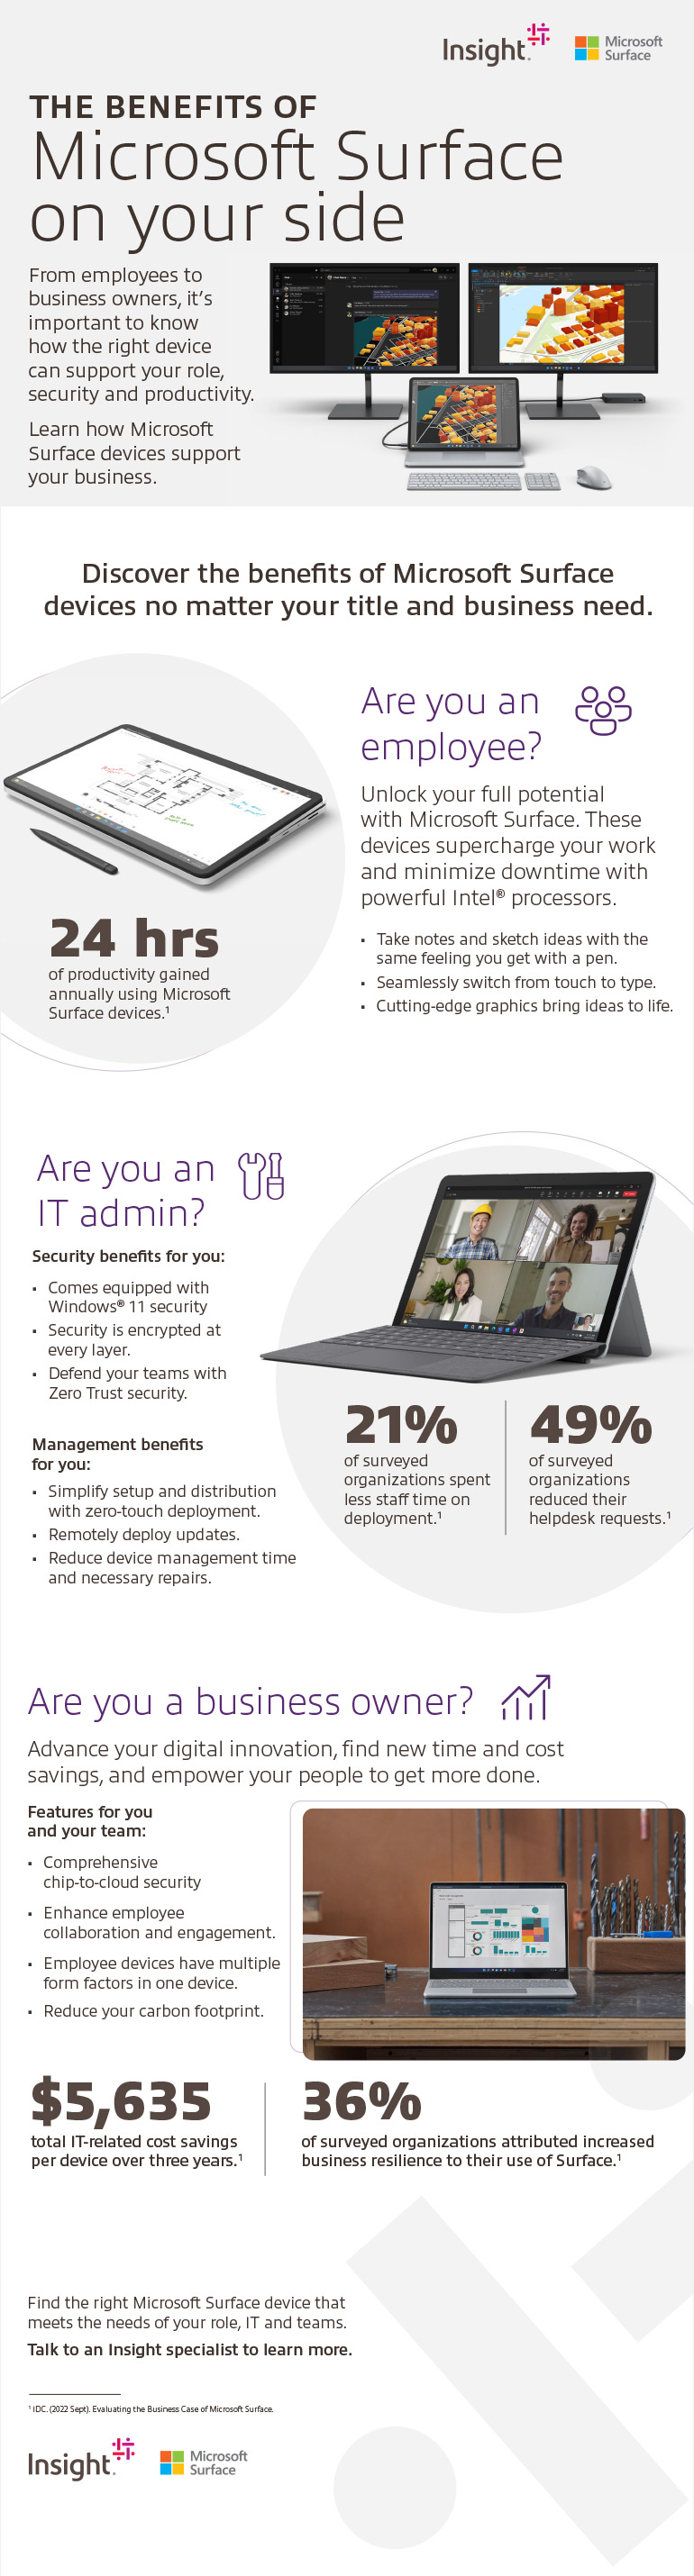 The Benefits of Microsoft Surface Based on Your Role inforgraphic